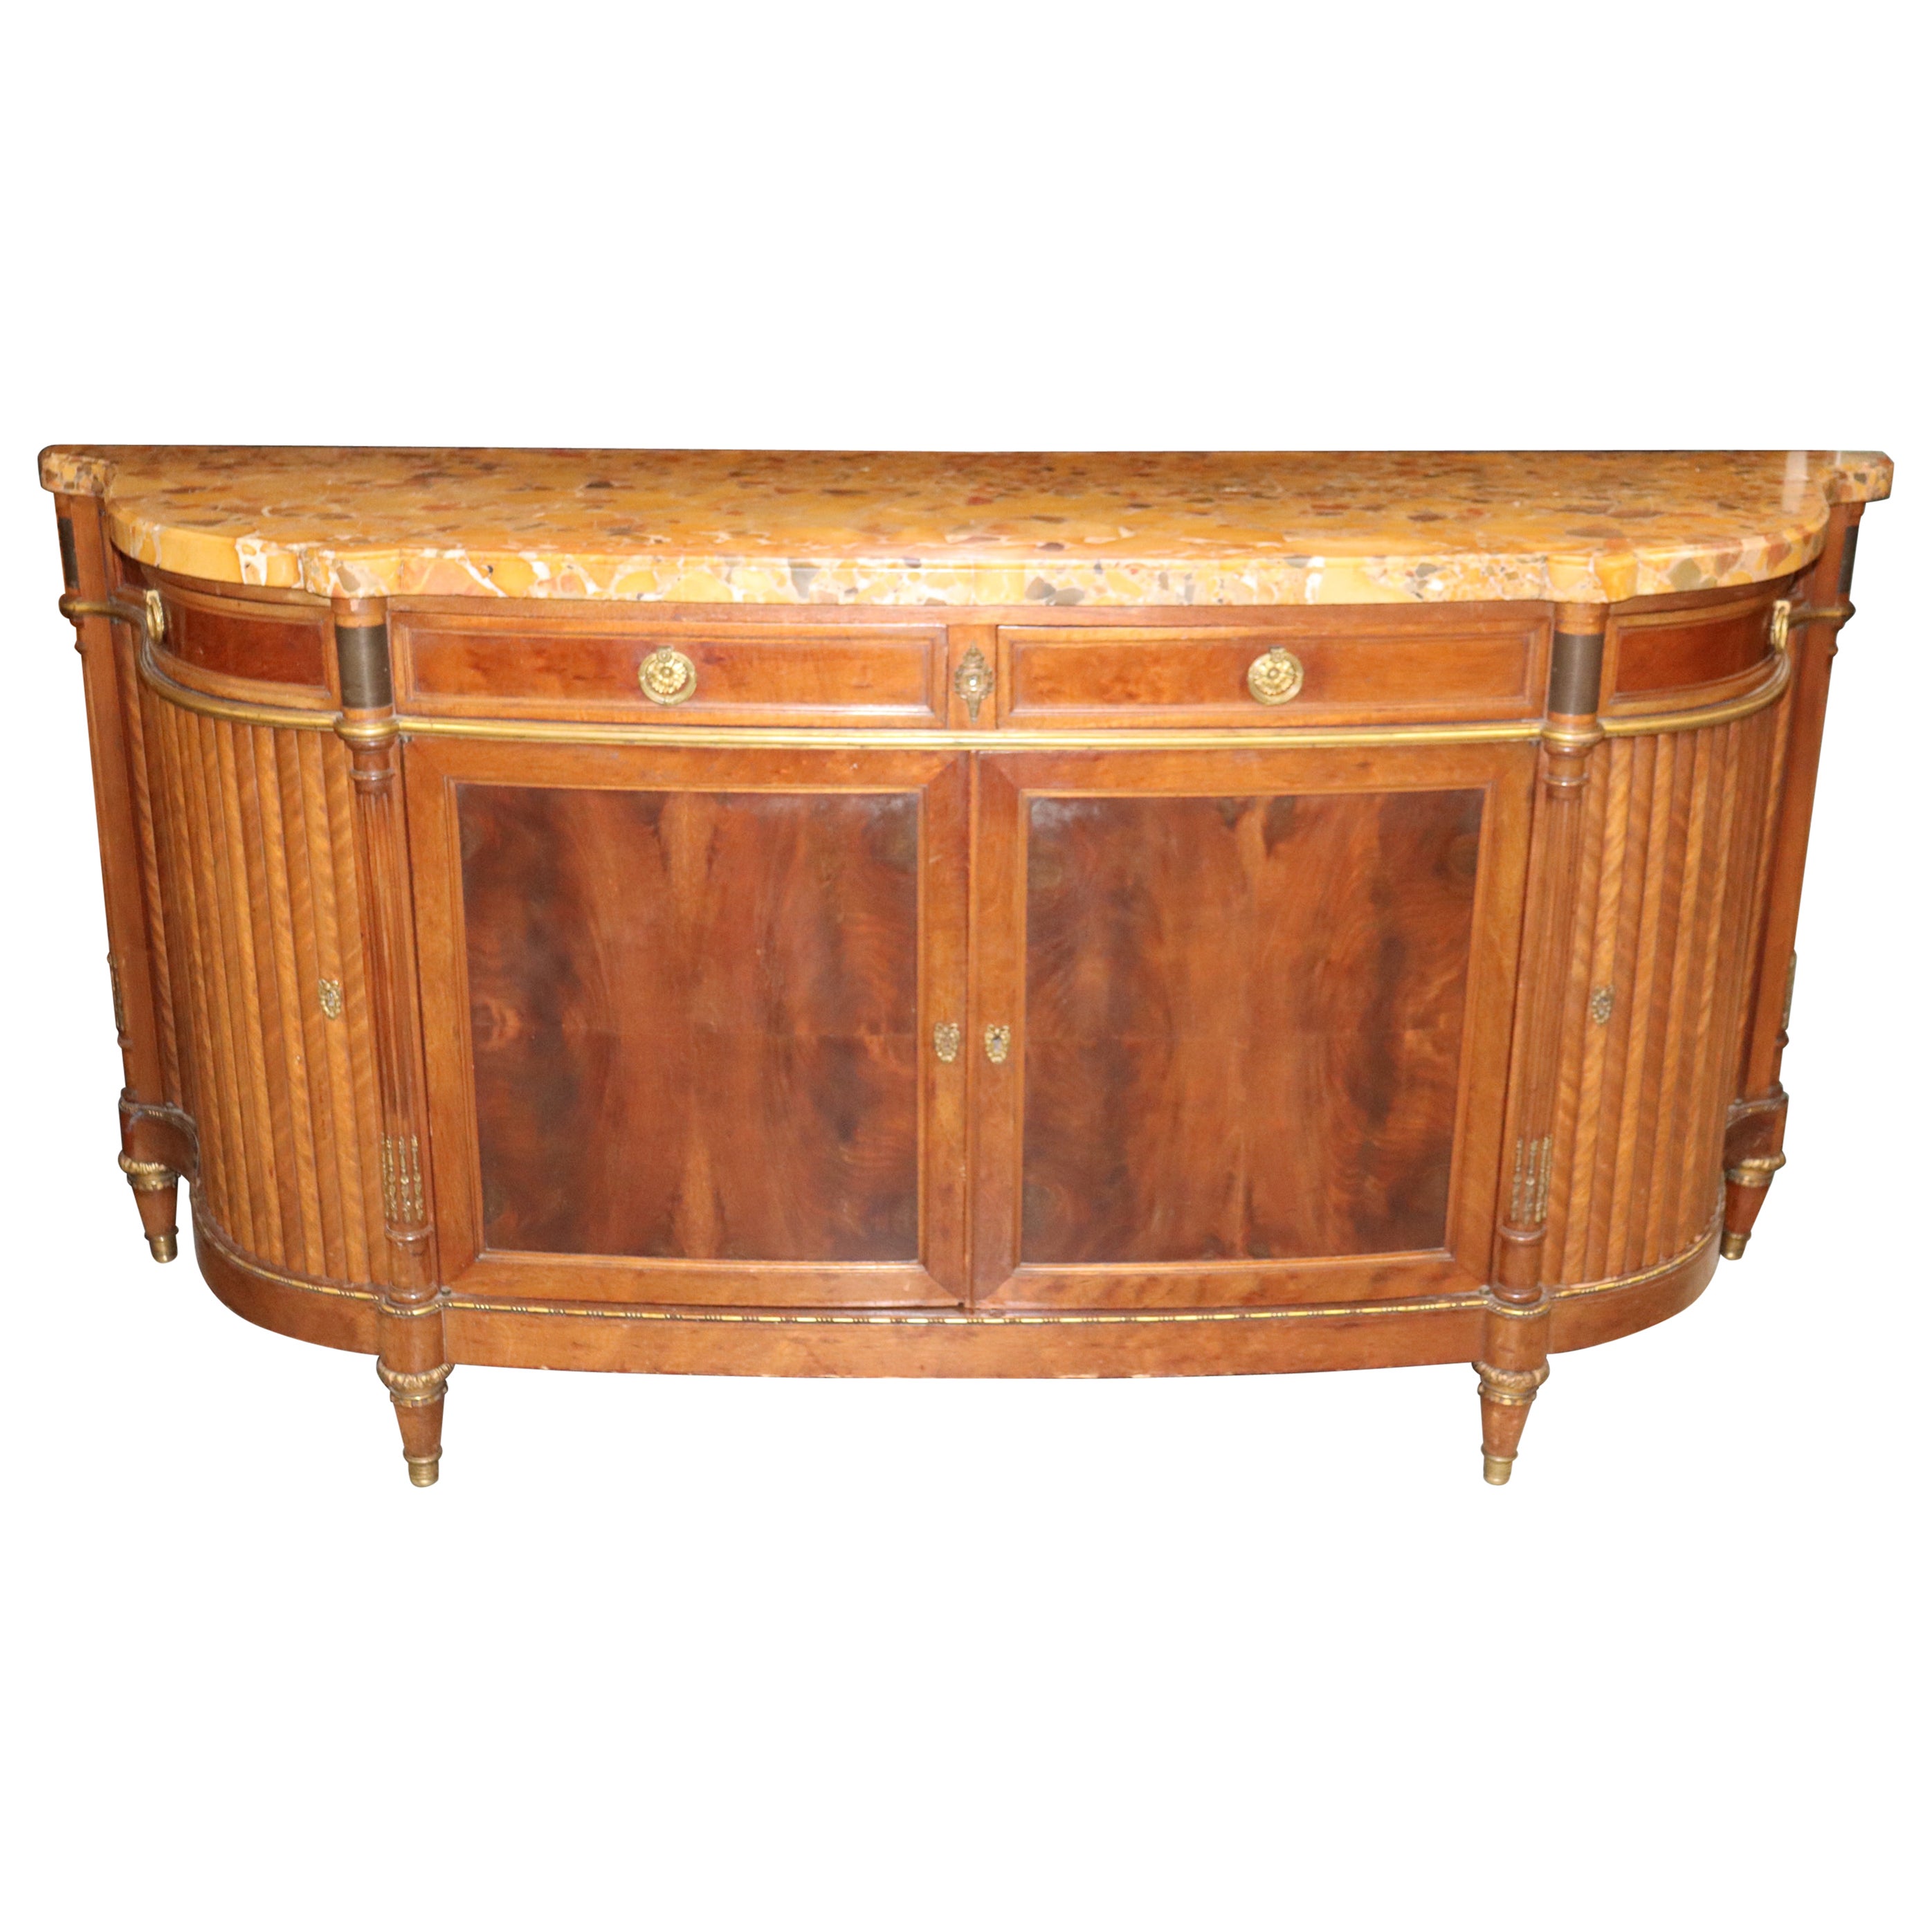 Fine French Breche D' Alep Marble Top Faux Tambor Doors Directoire Sideboard 